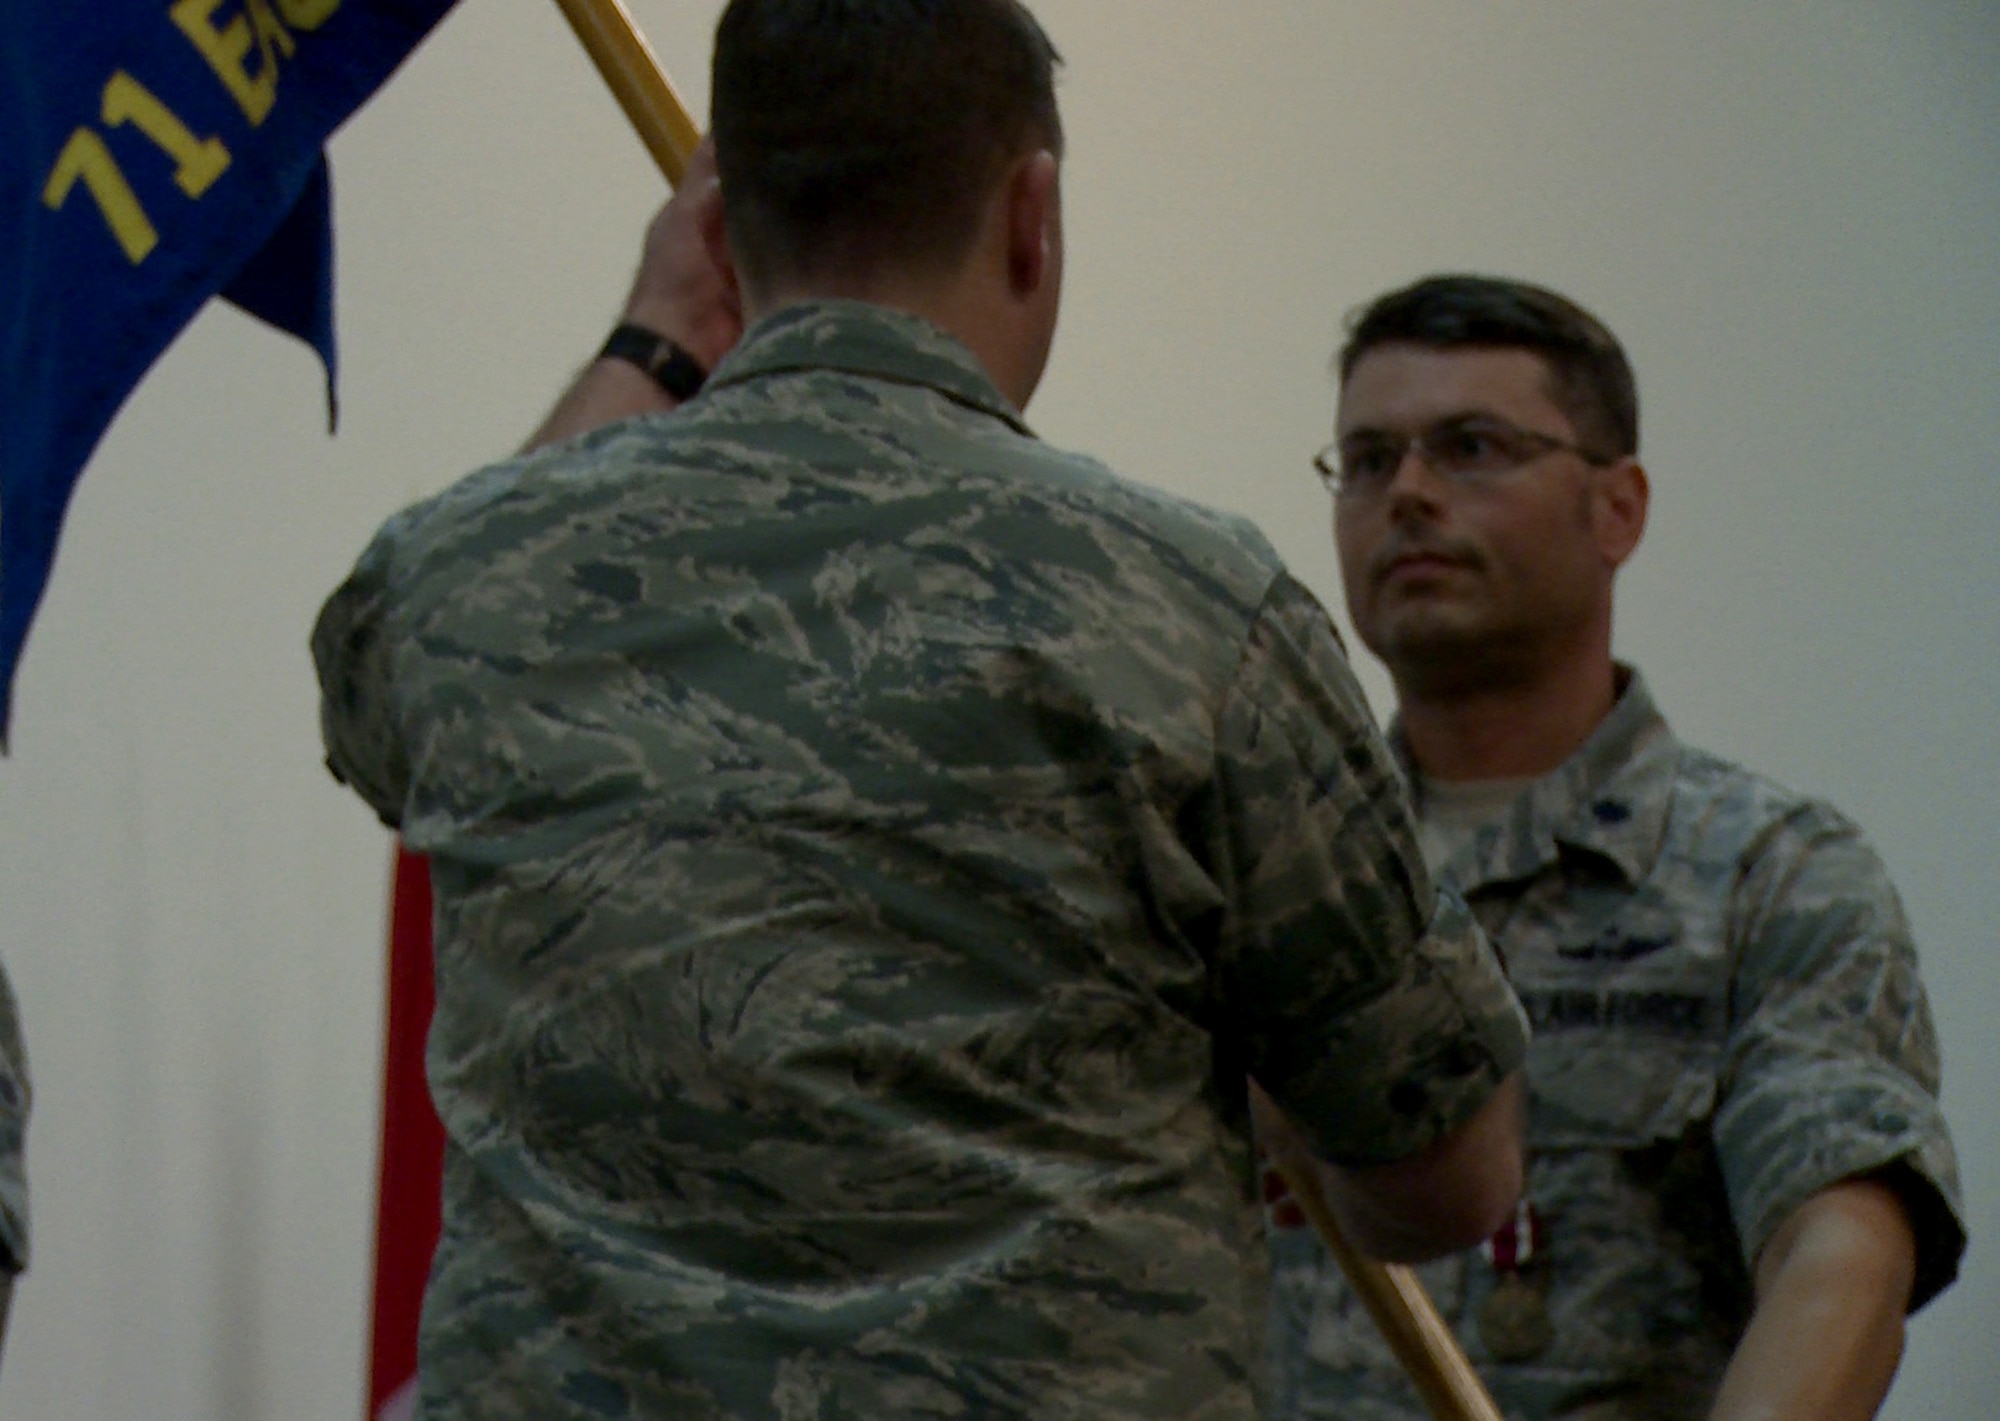 U.S. Air Force Lt. Col. Christopher Wachter, left, 379th Expeditionary Operations Group deputy commander, and Lt. Col. Stuart Williamson, 71st Expeditionary Air Control Squadron commander, hold a guidon during an inactivation ceremony for the 71st EACS Nov. 1, 2014, at Al Udeid Air Base, Qatar. During the ceremony, in accordance with Air Force tradition, the squadron’s guidon was rolled up and cased.